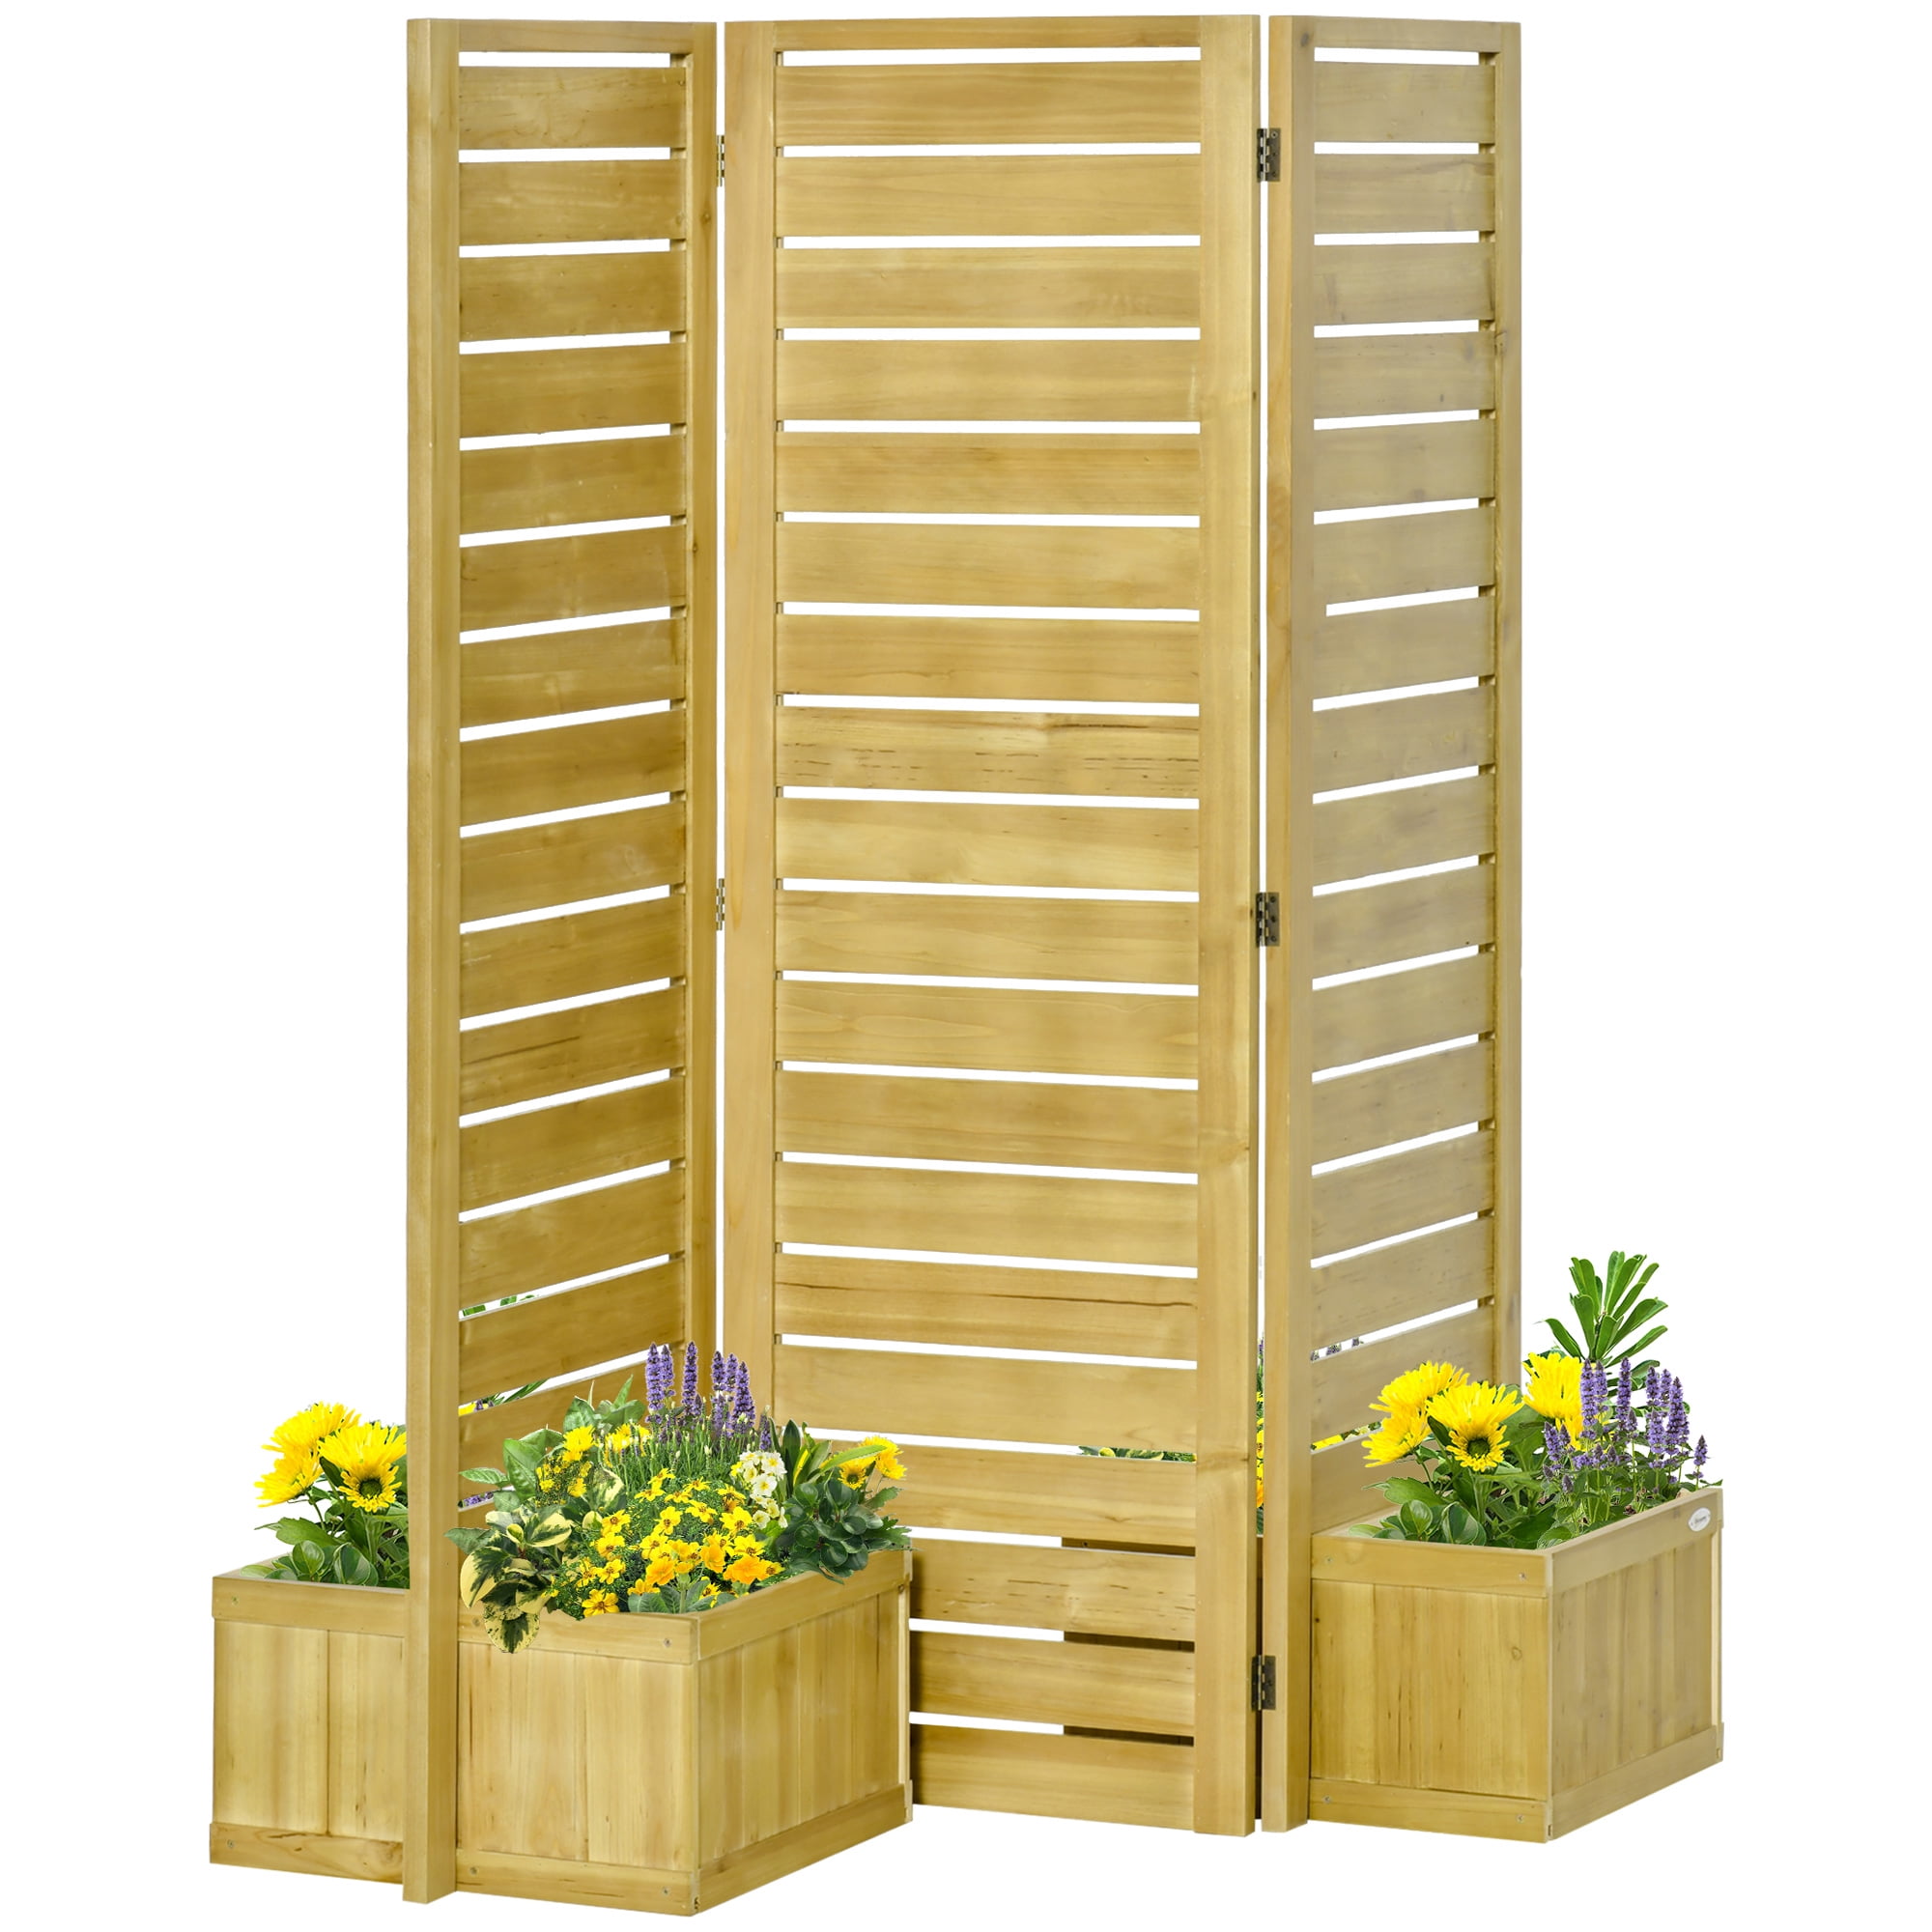 Outsunny Freestanding Outdoor Privacy Screen, 4 Self-Draining Planters / Raised Garden Beds, 3 Hinged Panels for Tub, Patio, Backyard, Deck, Natural - Walmart.com